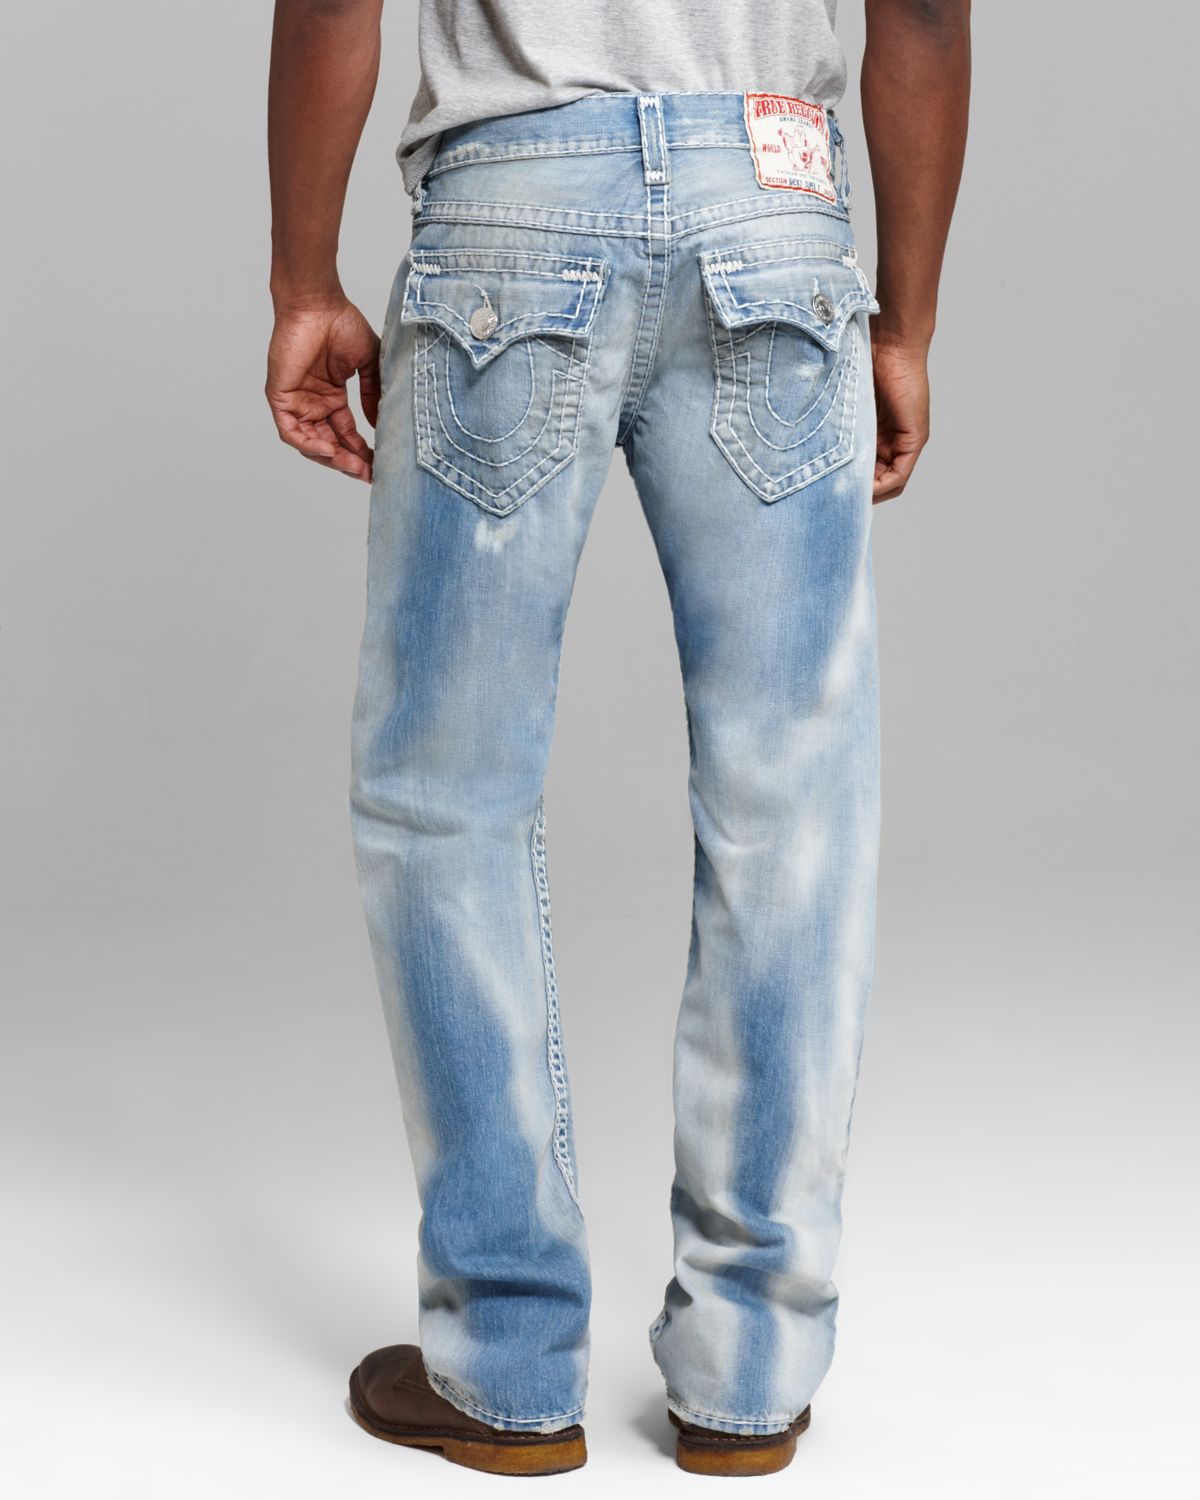 True Religion Jeans Ricky Super T Straight Fit in Hastings Pass in Blue